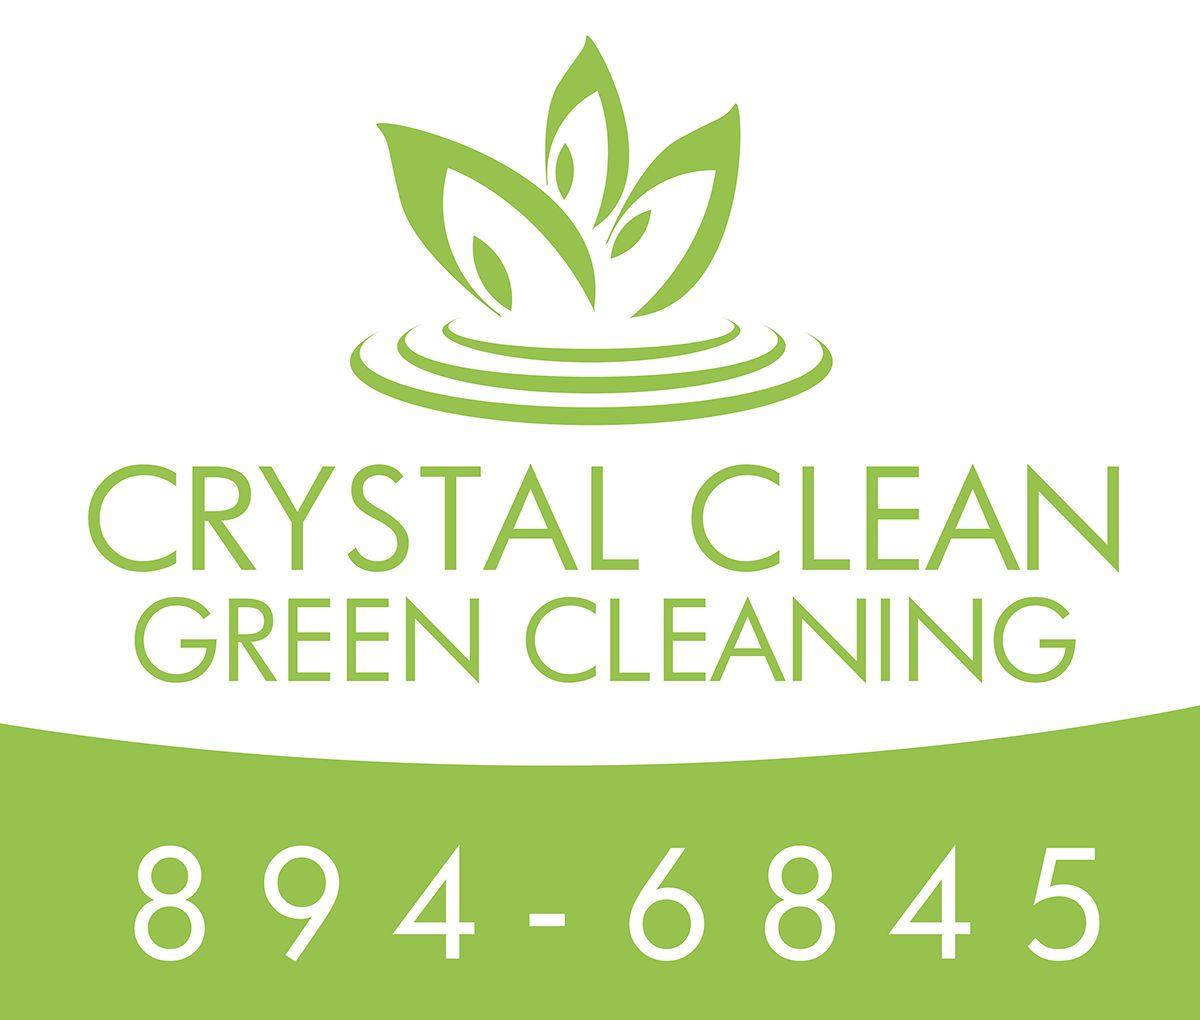 Green Cleaning Company Logo - Crystal Clean Green Cleaning - Best House Cleaning Services